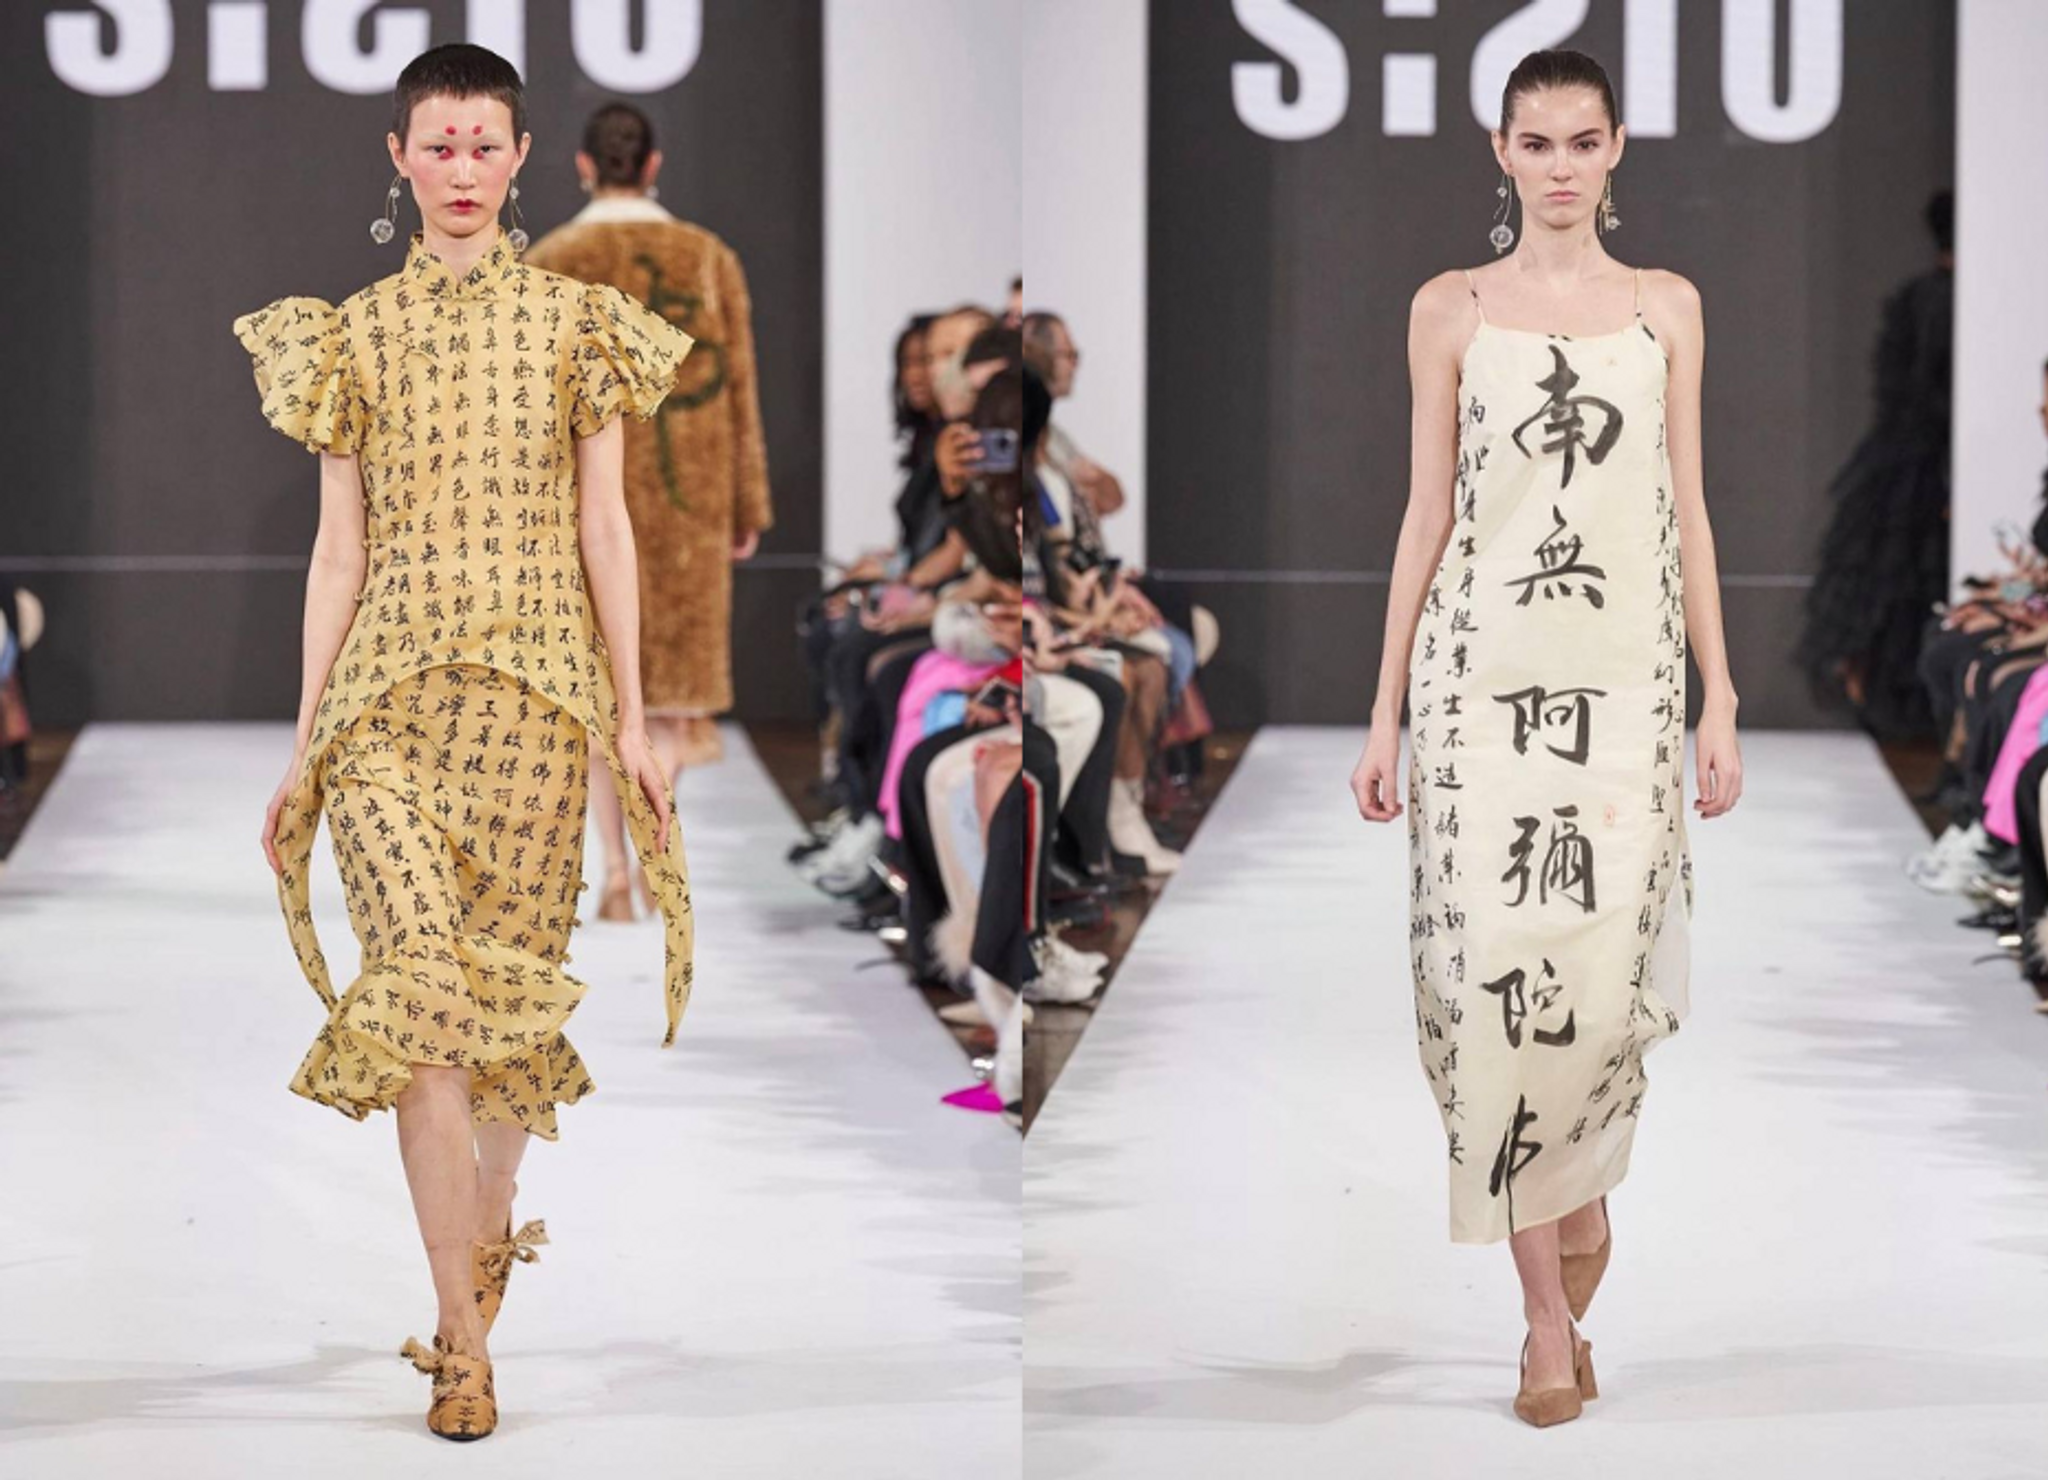 SISIO's Buddhism-themed clothing champions mental health